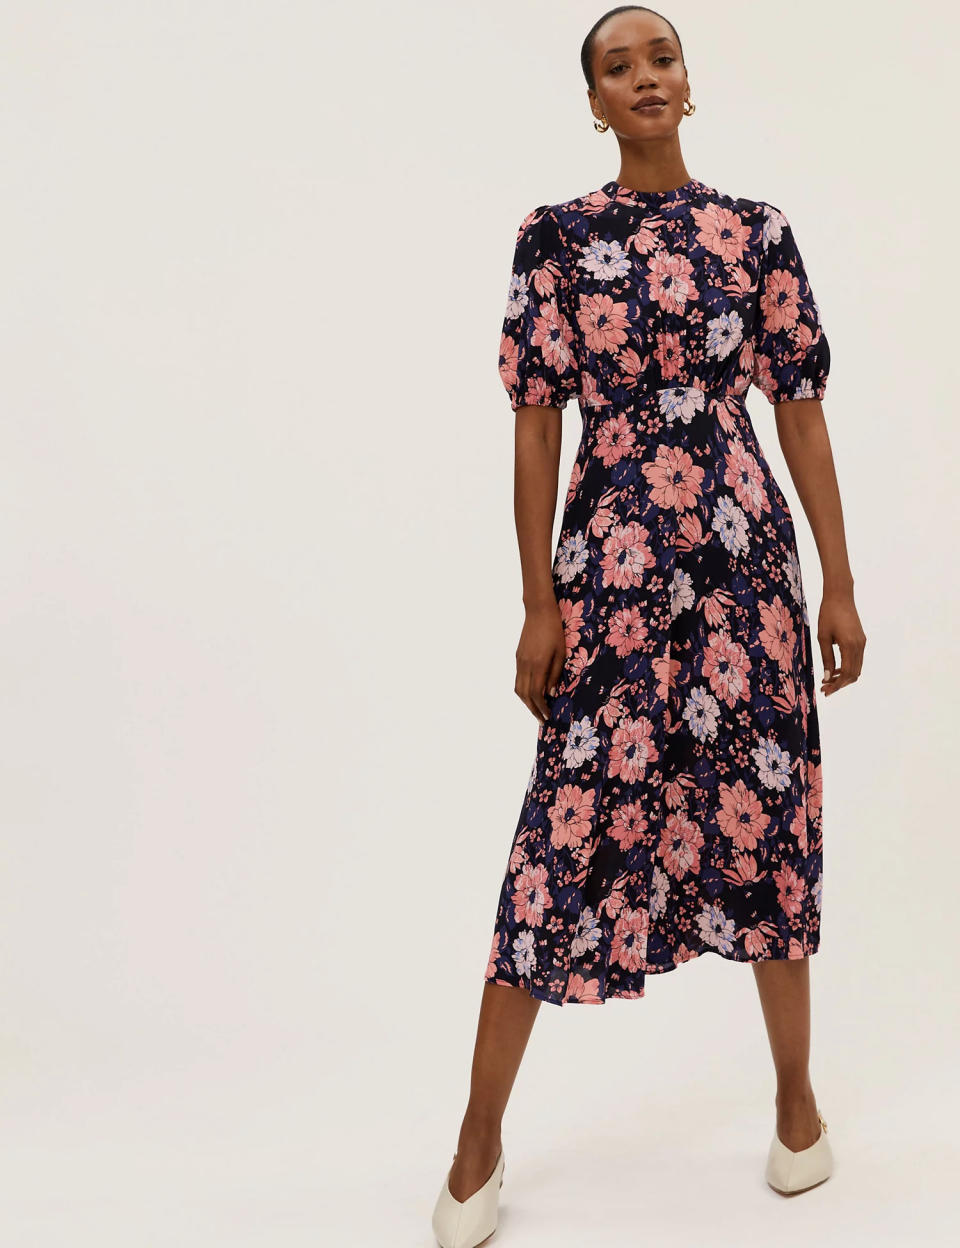 This Holly Willoughby-approved dress is an effortless day-to-evening look. (M&S)